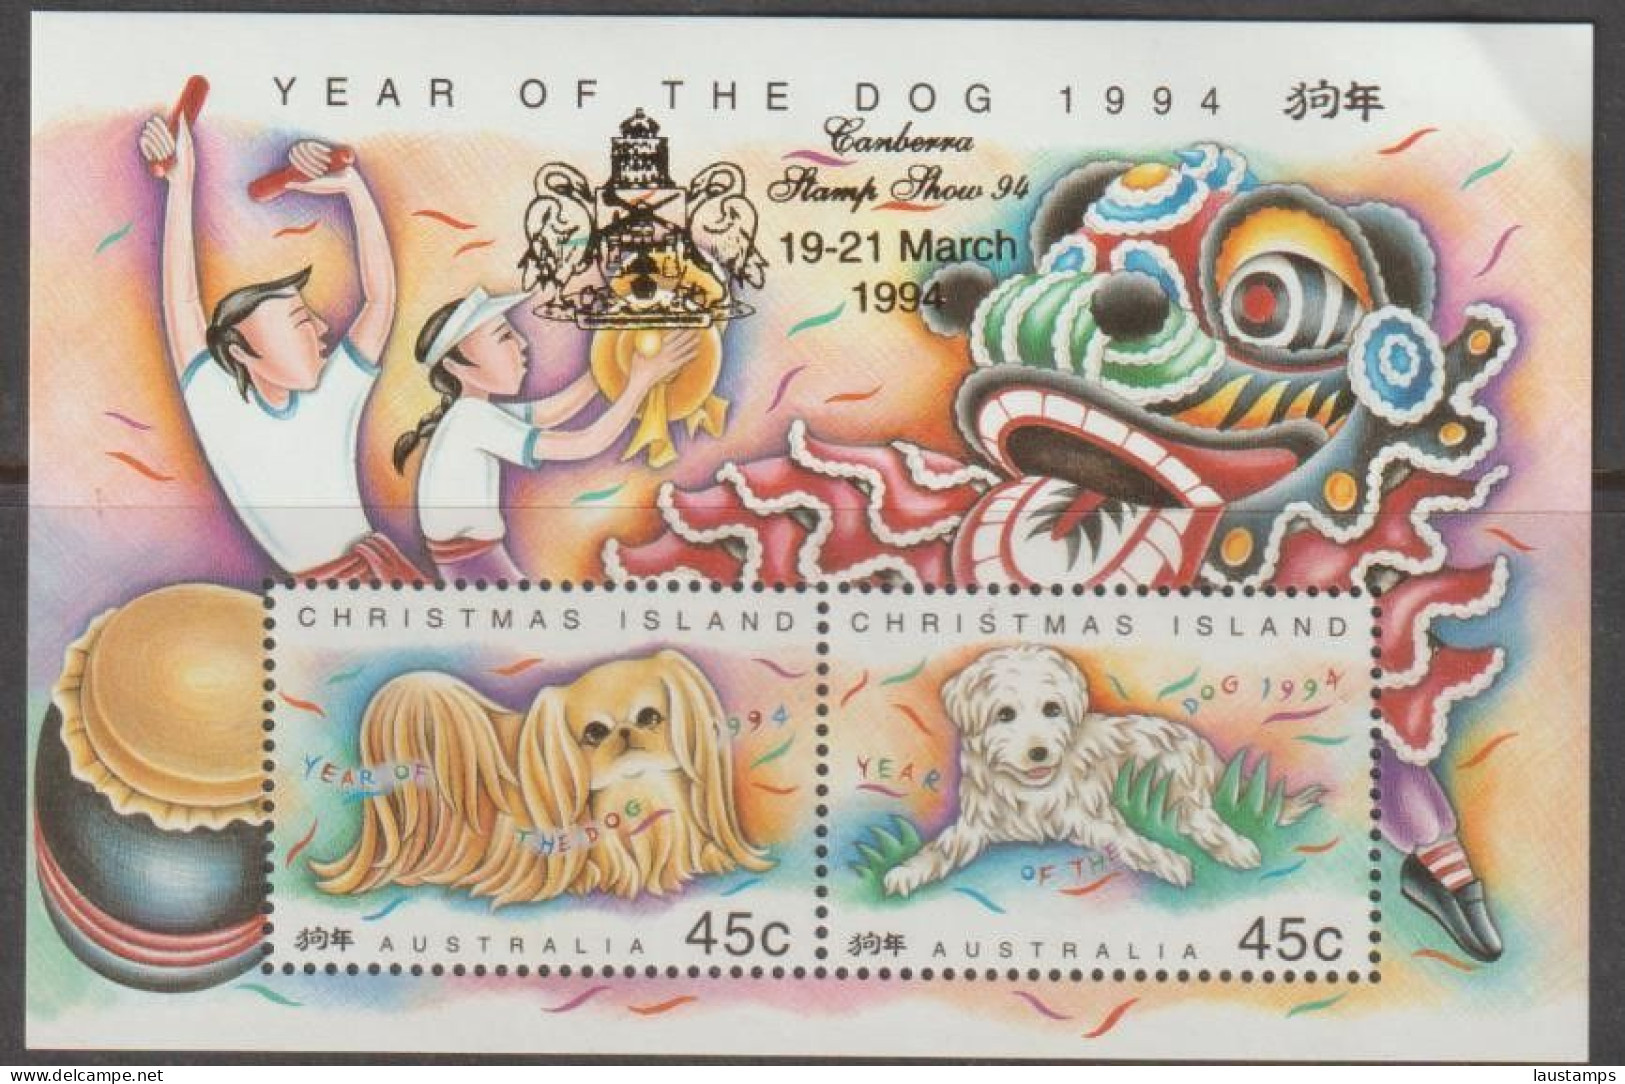 Christmas Island 1994 Year Of The Dog Ovpt Canberra Stamps Show S/S MNH - Año Nuevo Chino